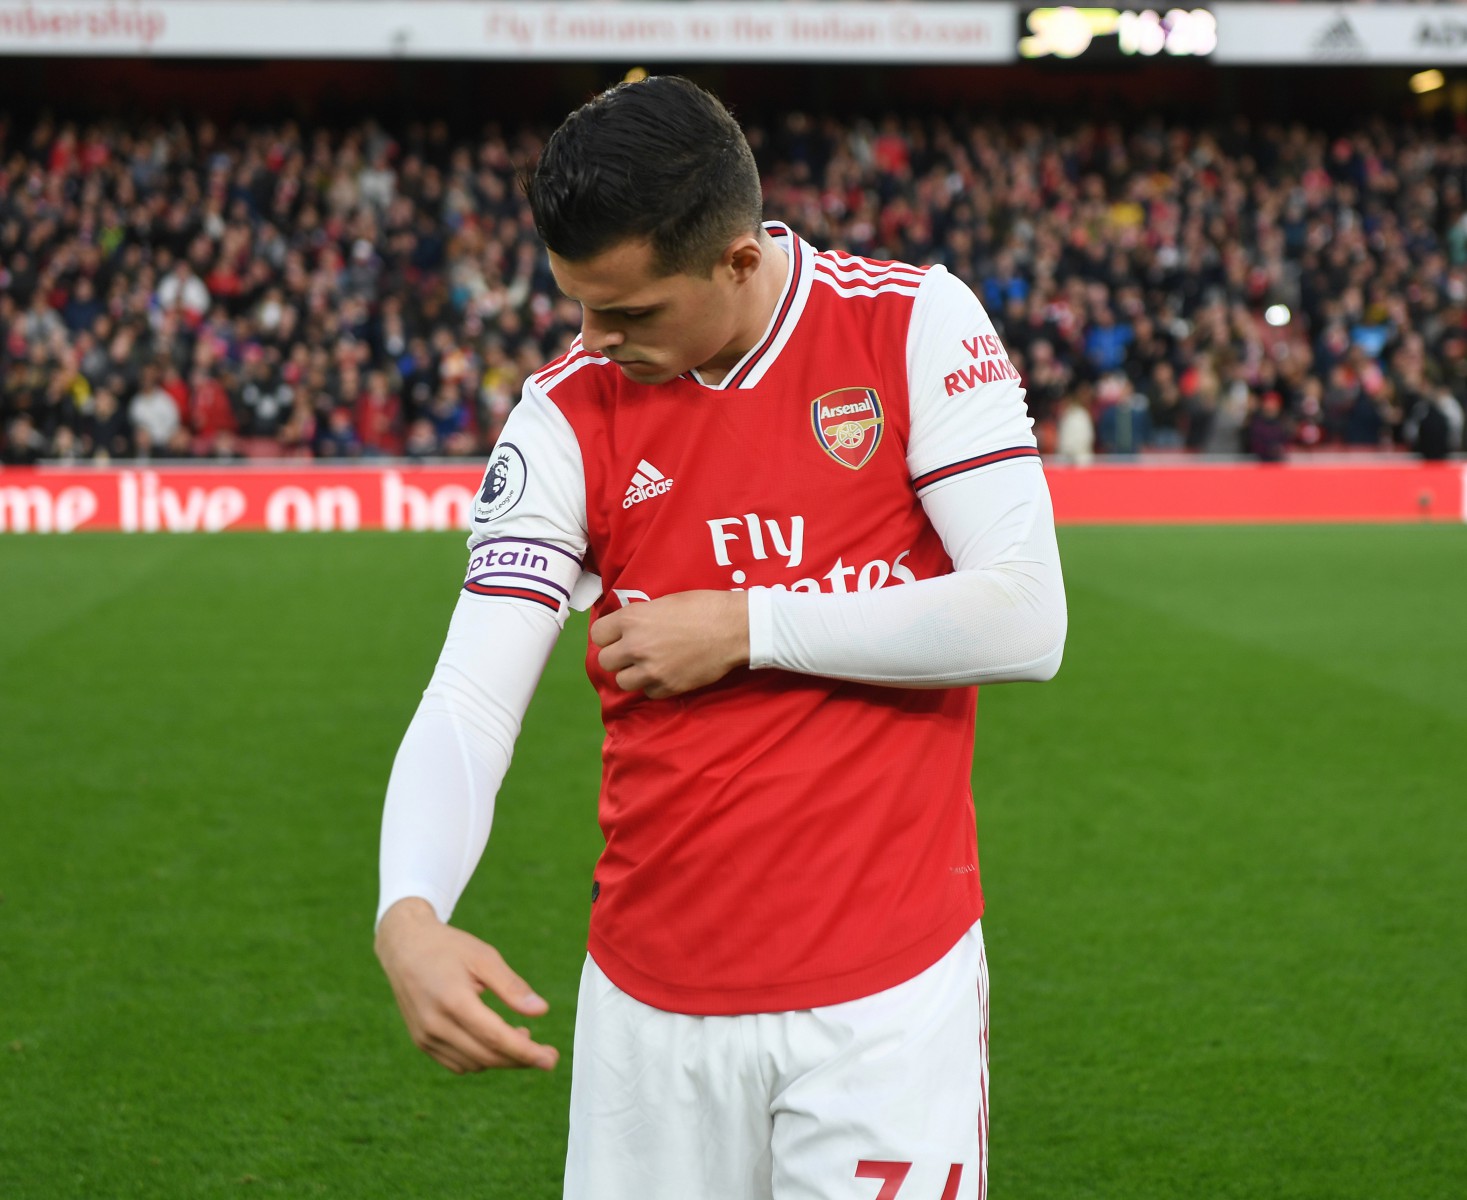 There are fears that stripping Xhaka of the captaincy will cause a dressing-room revolt at the Emirates